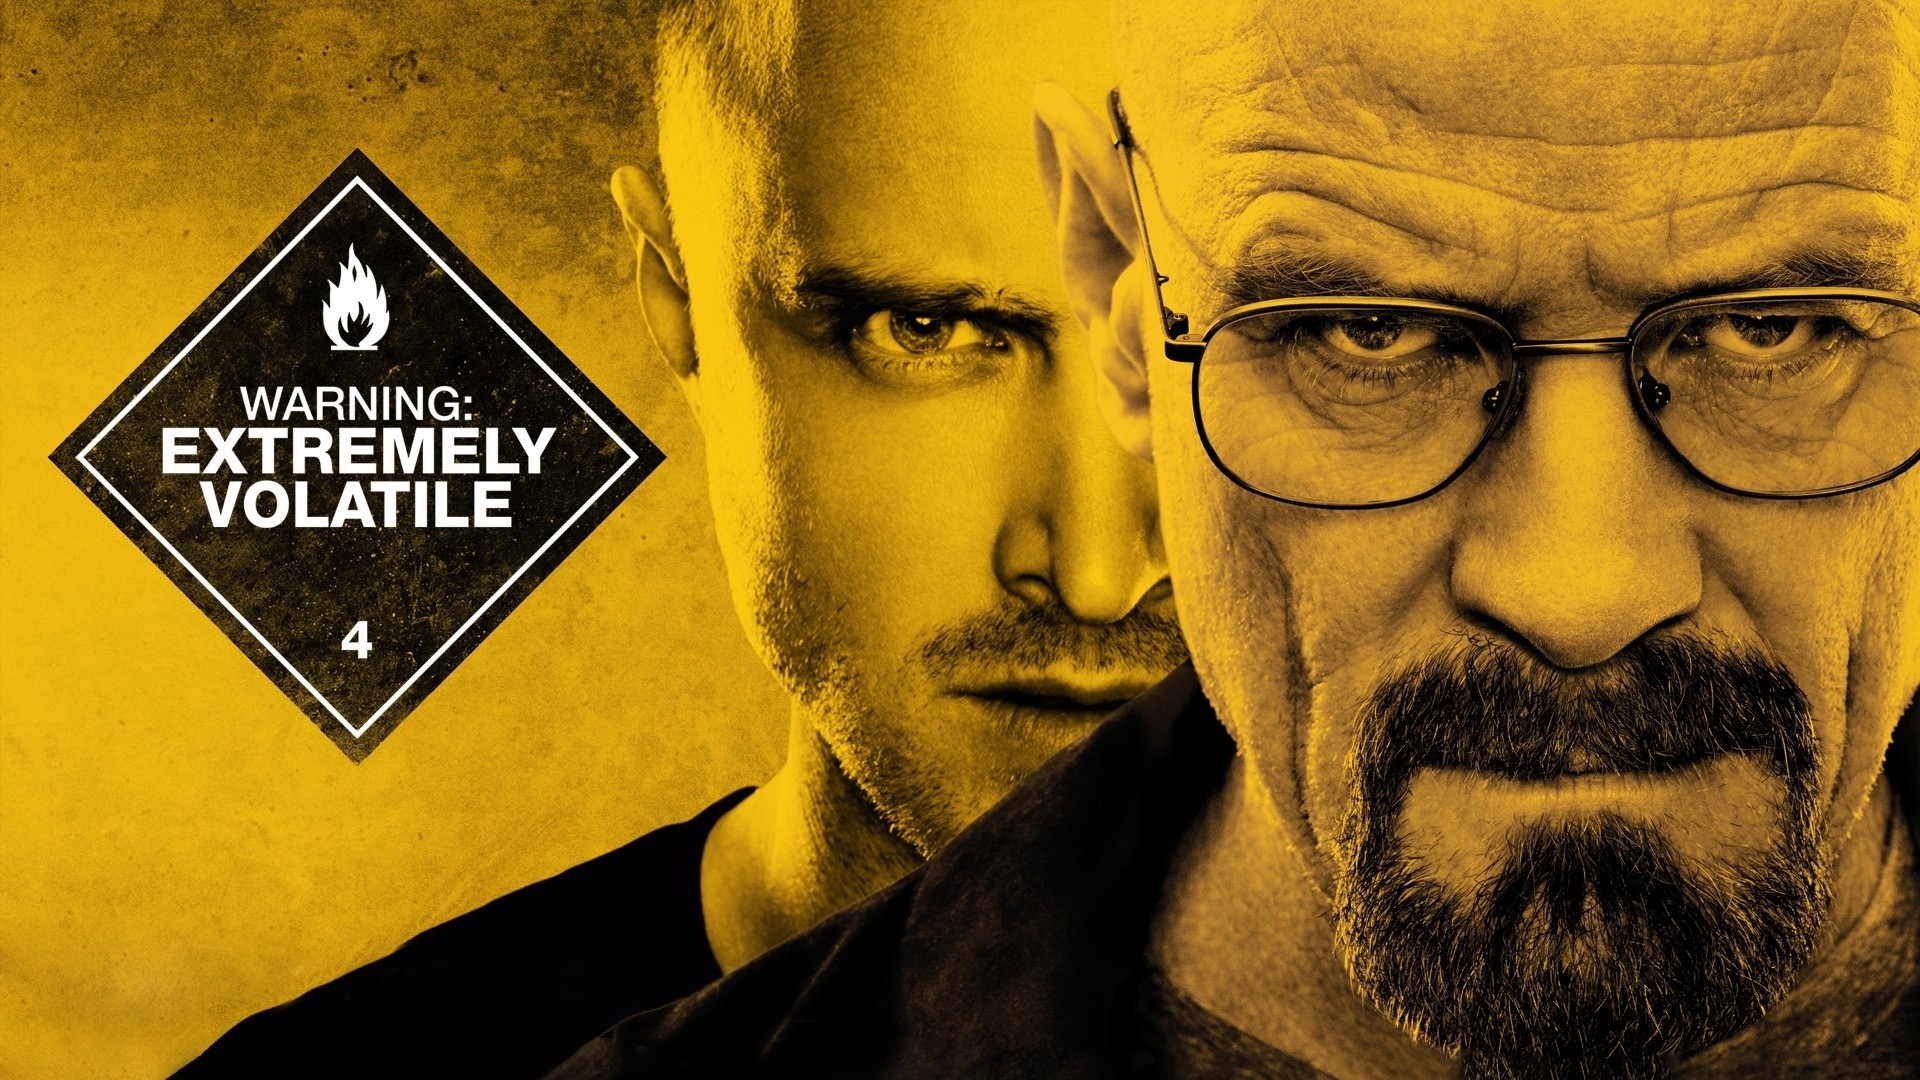 Preview Wallpaper Breaking Bad Actors Face Walter White Jesse Pinkman 1920x1080 1920x1080